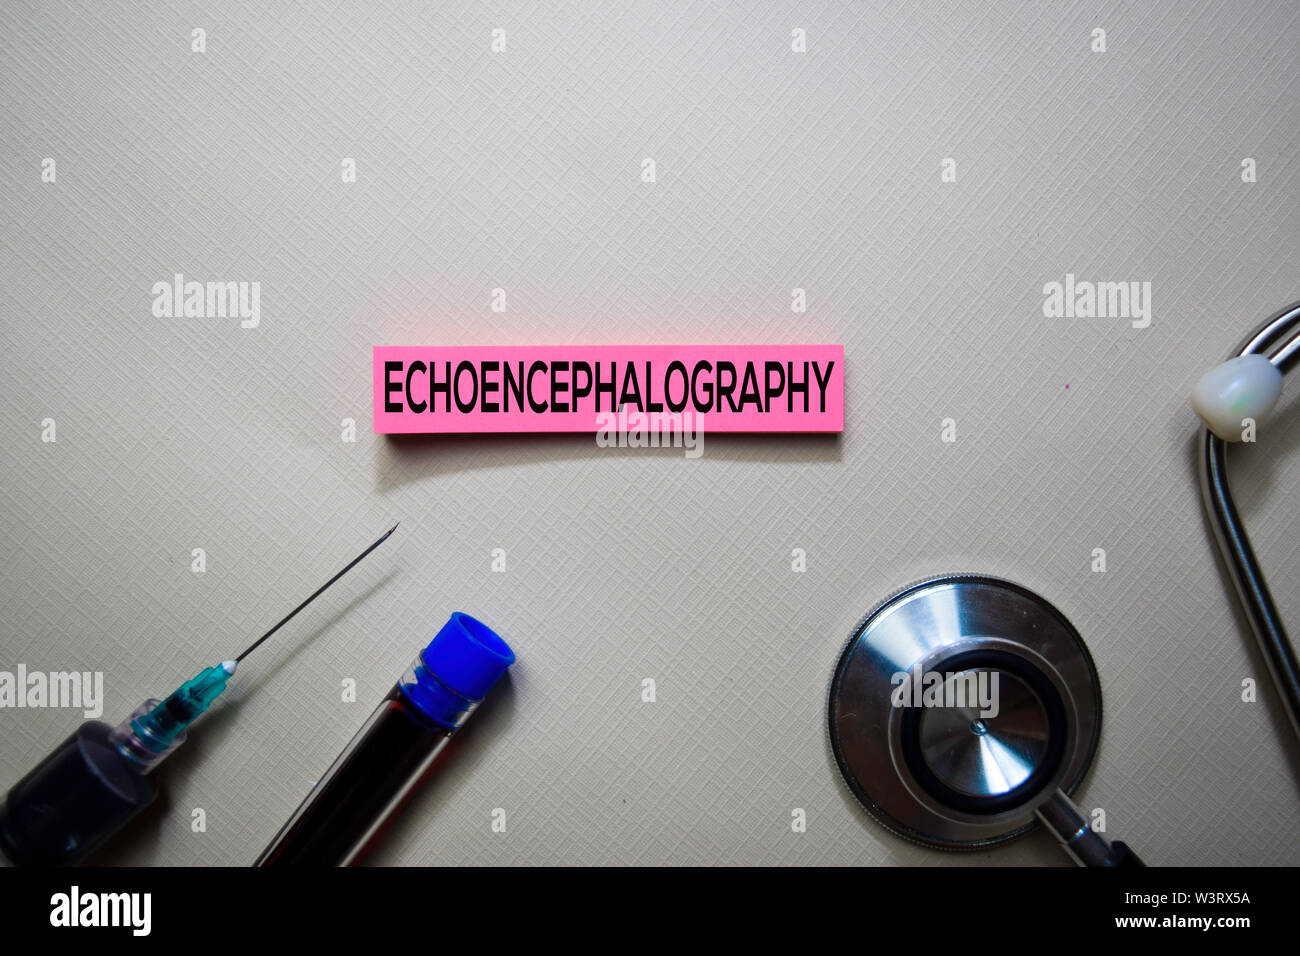 Echoencephalography text on Sticky Notes. Top view isolated on office desk. Healthcare/Medical concept Stock Photo